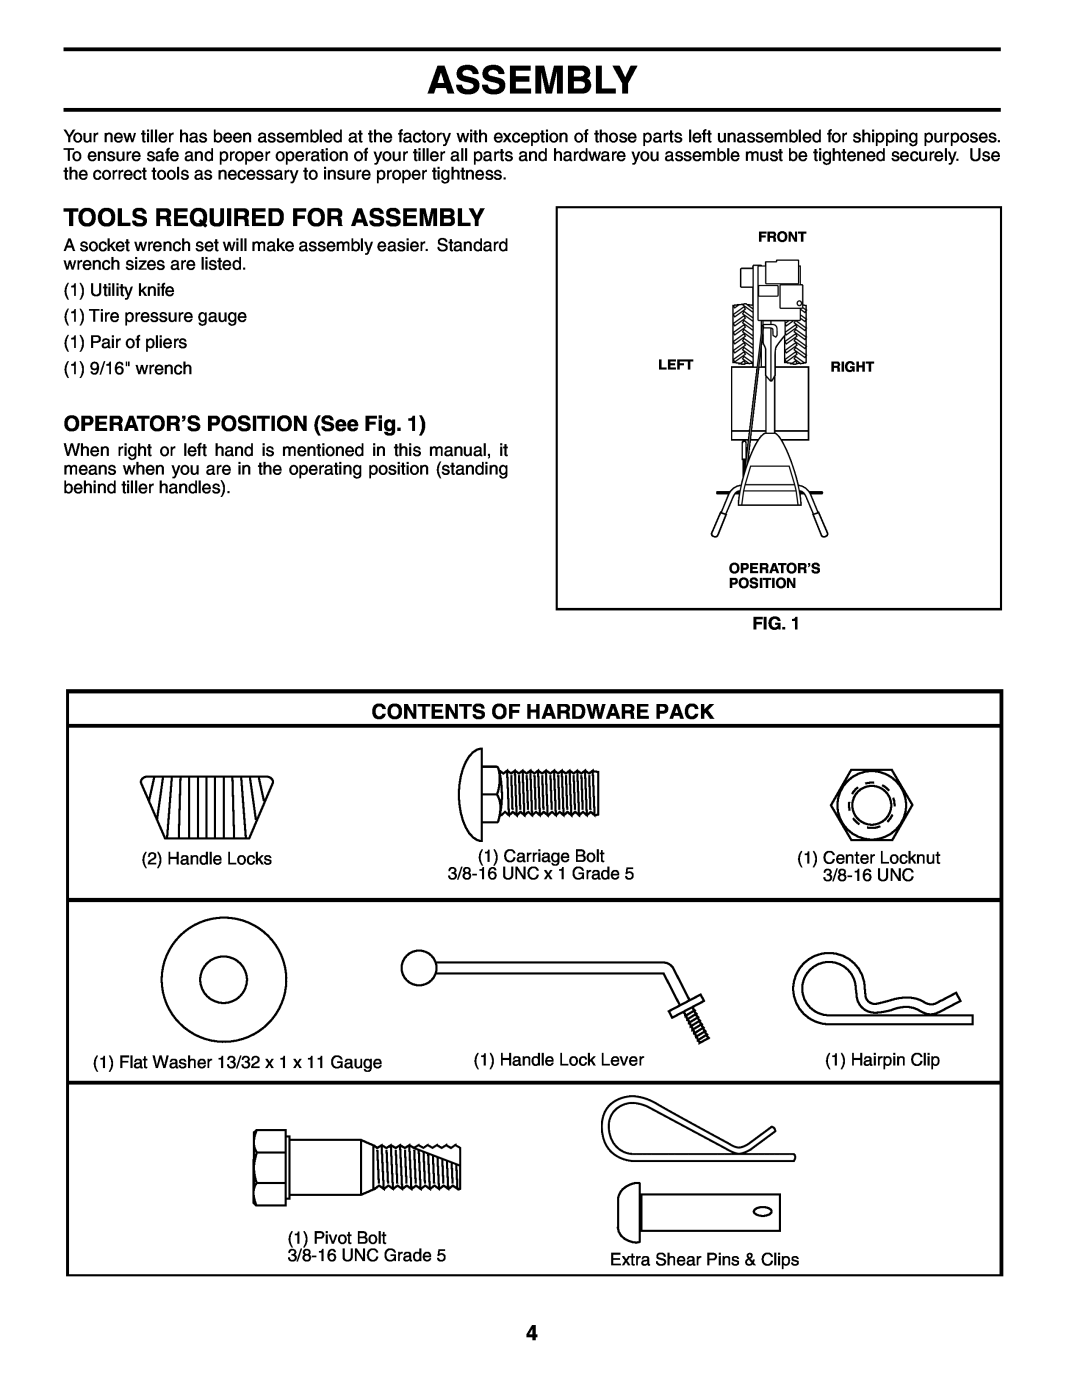 Poulan 188904 owner manual Tools Required For Assembly, OPERATOR’S POSITION See Fig, Contents Of Hardware Pack 